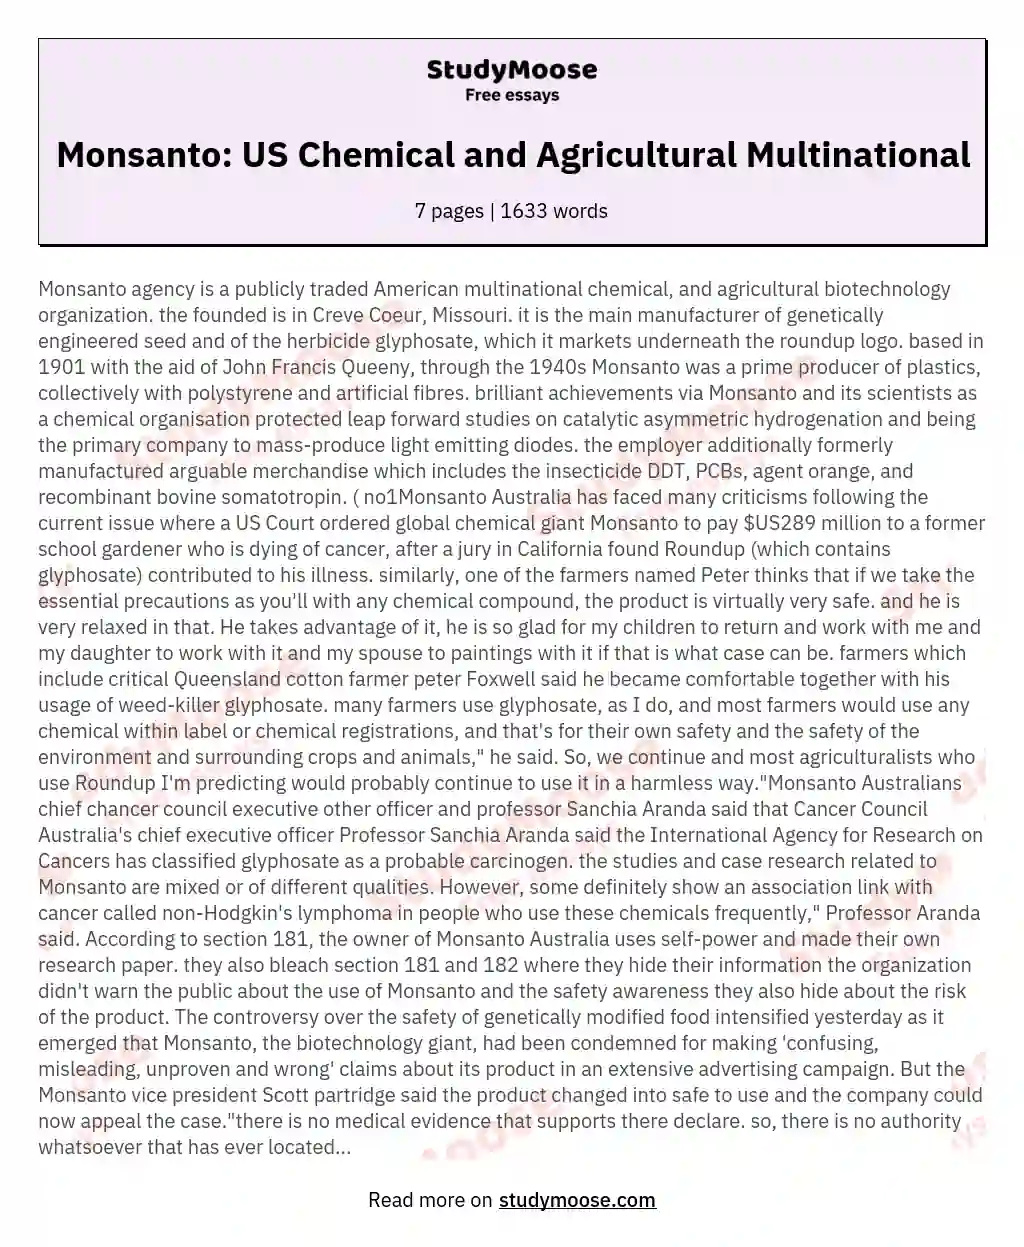 Monsanto agency is a publicly traded American multinational chemical and agricultural biotechnology